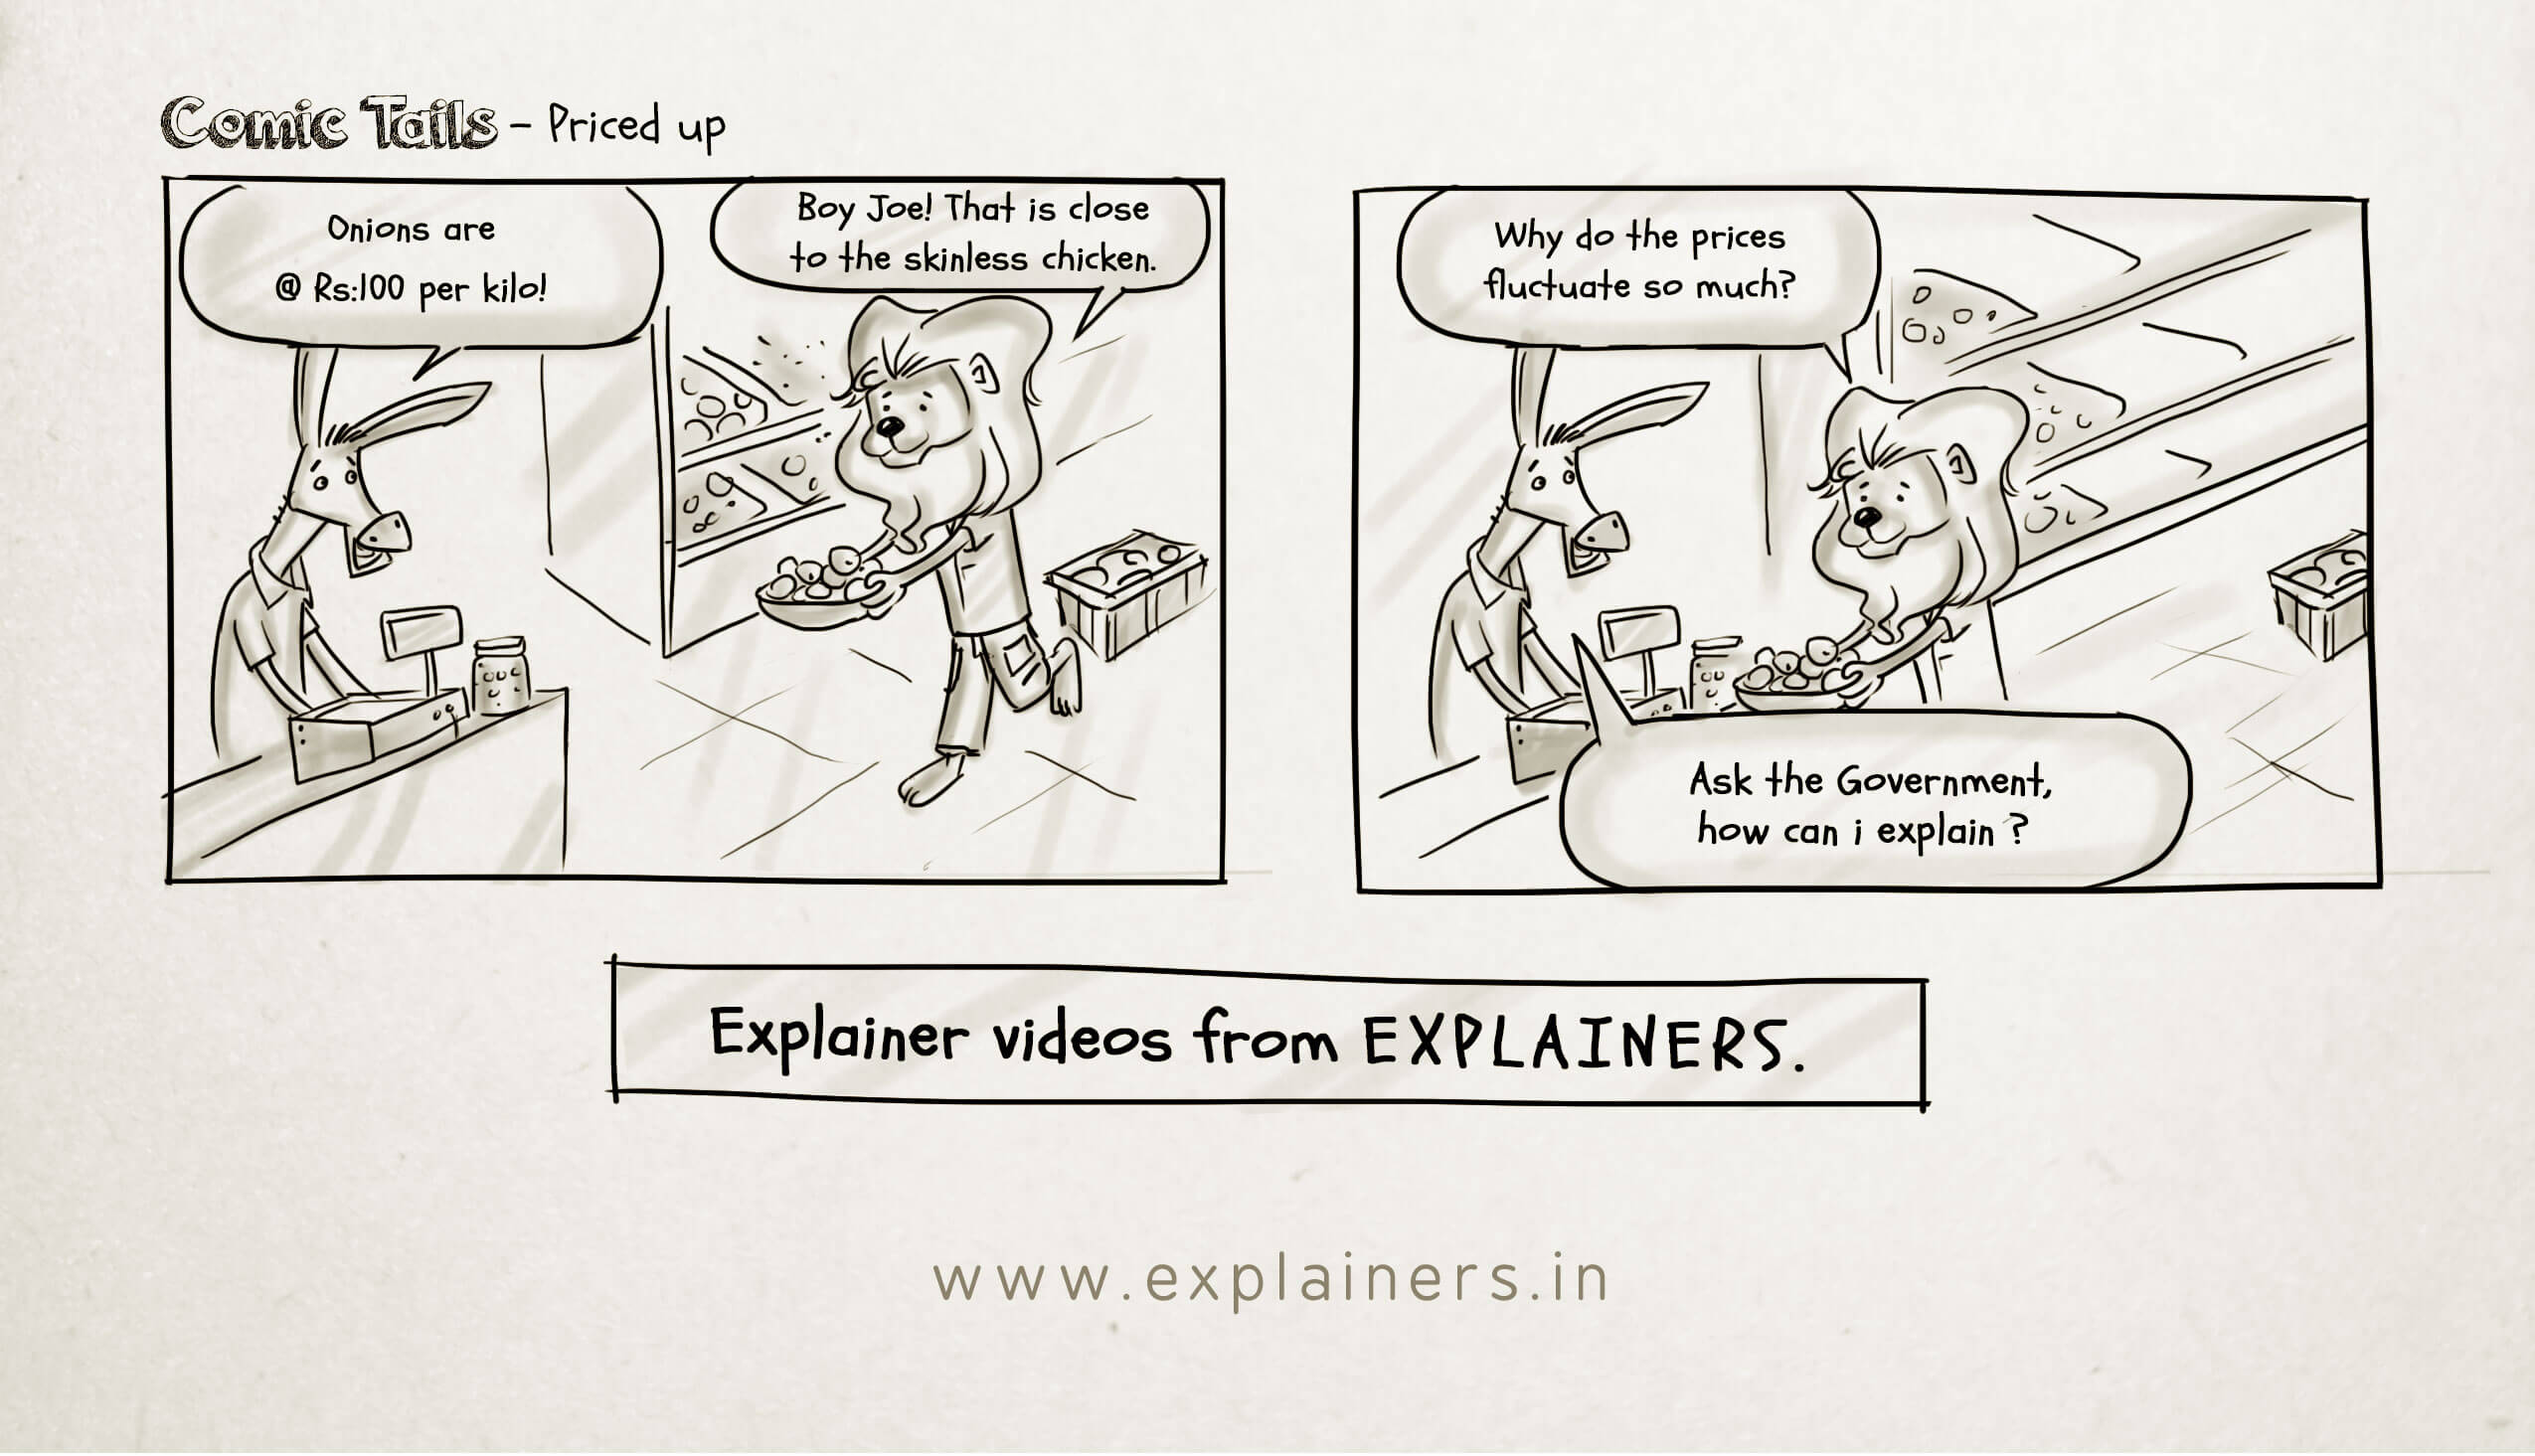 Comic Tails, Comic, Priced up, Explainers video, explainers, animated explainer video, animation video, animation production company, explainer video production company, explainer video company in india